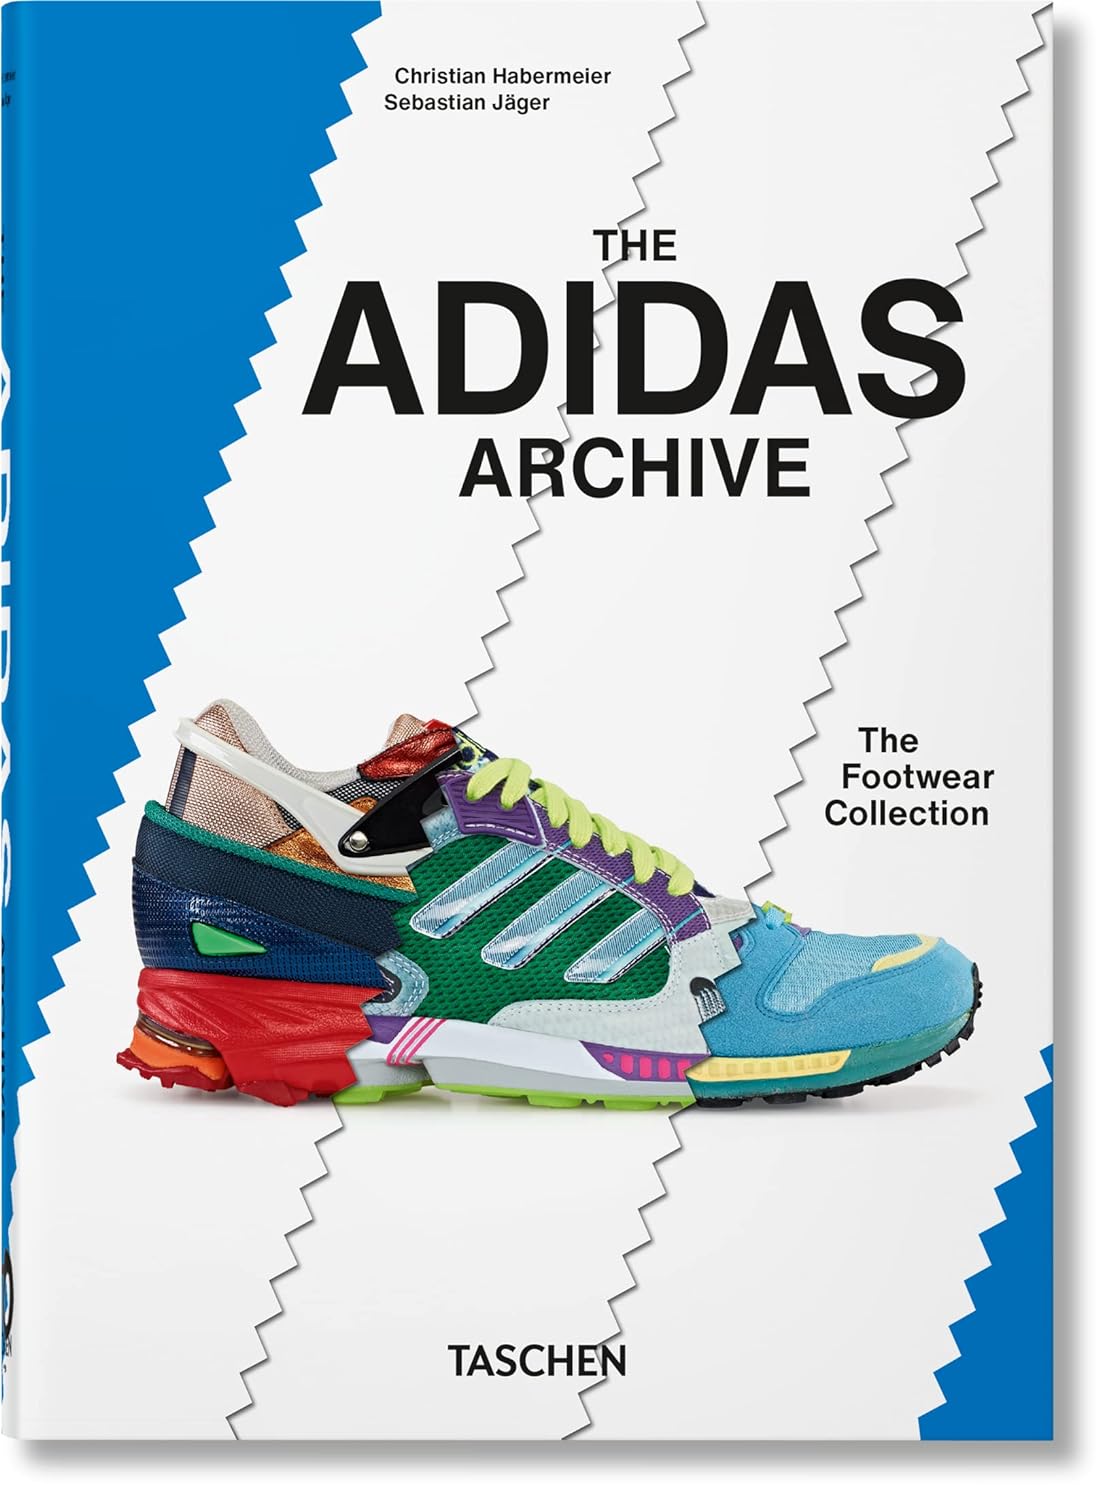 adidas 0017 02e The Adidas Archive. The Footwear Collection (40th Anniversary Edition)